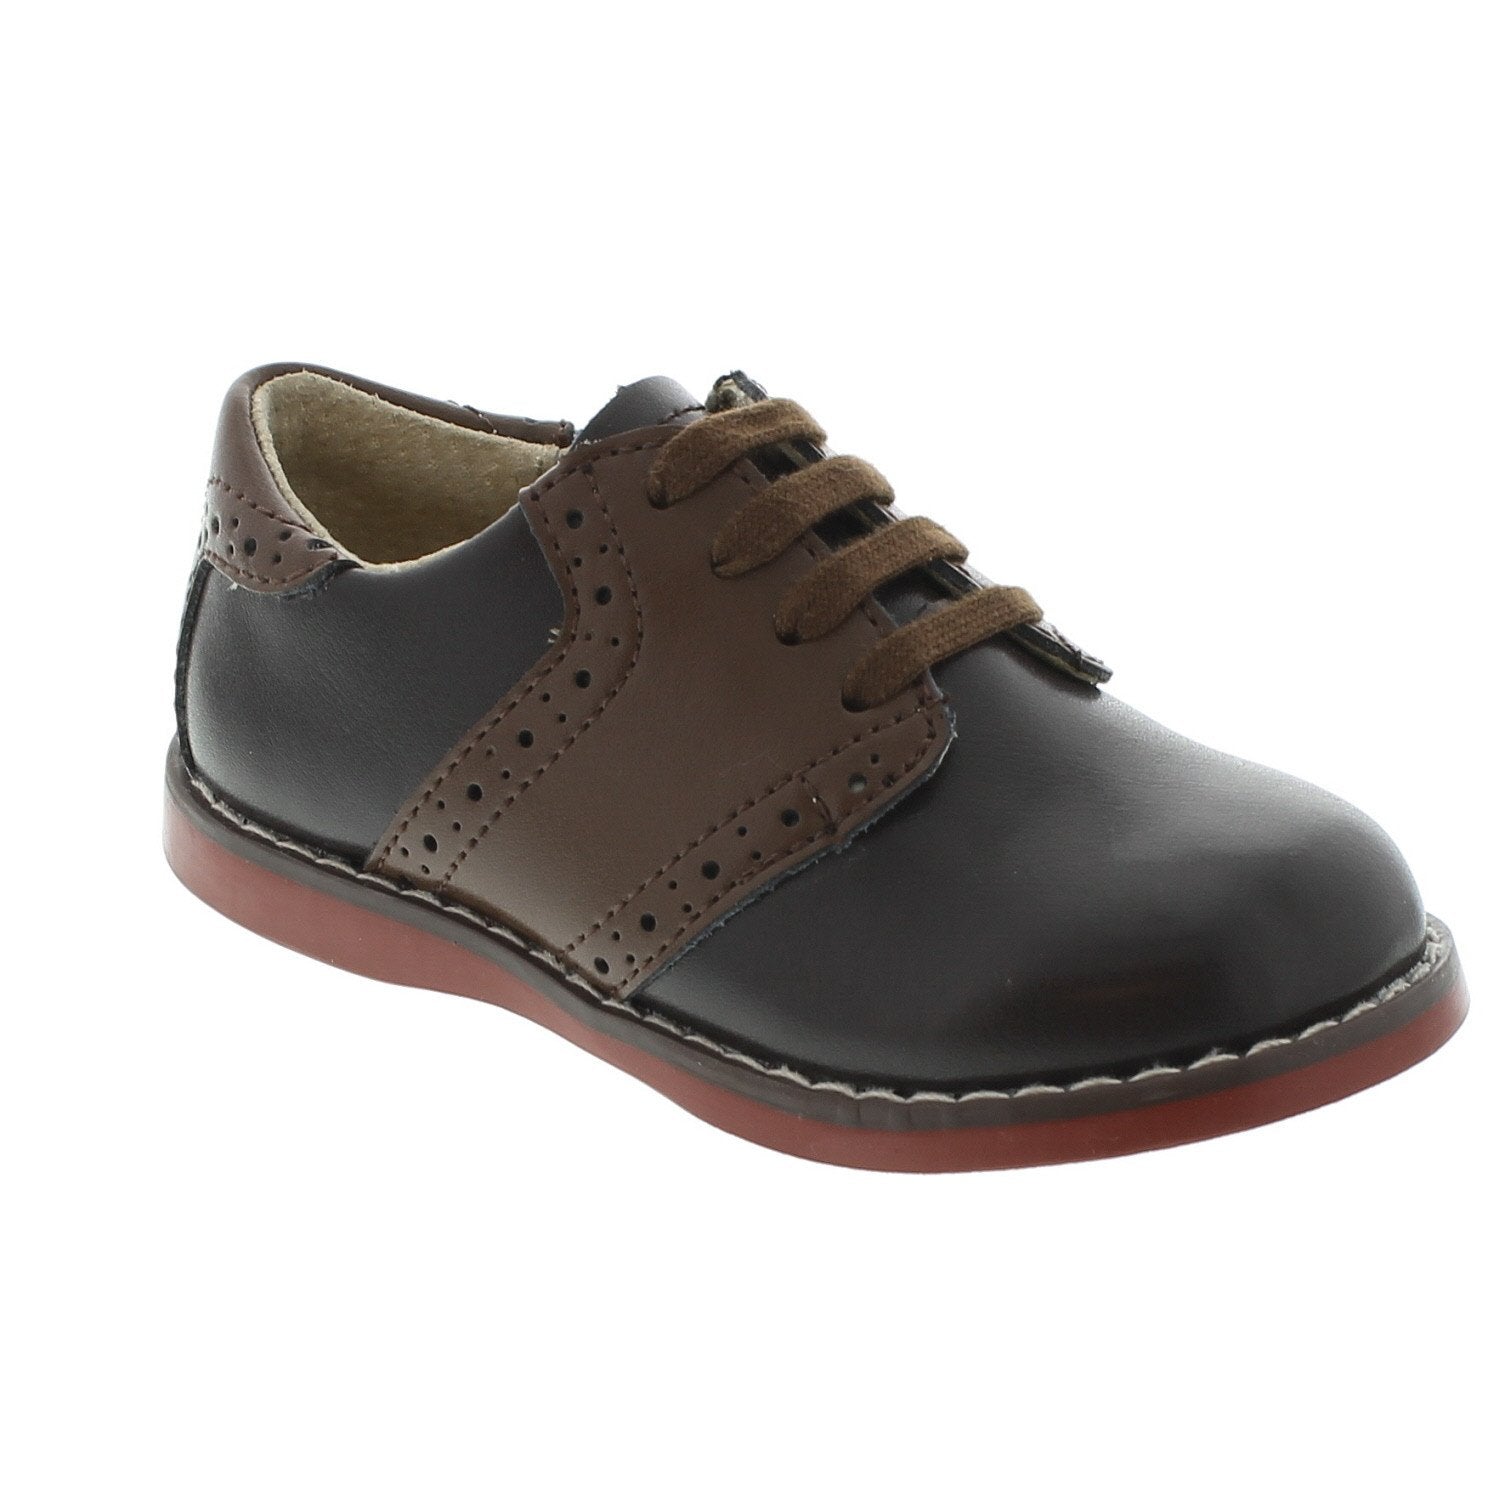 Connor - Brown & Taffy Saddle by Footmates - Ponseti's Shoes